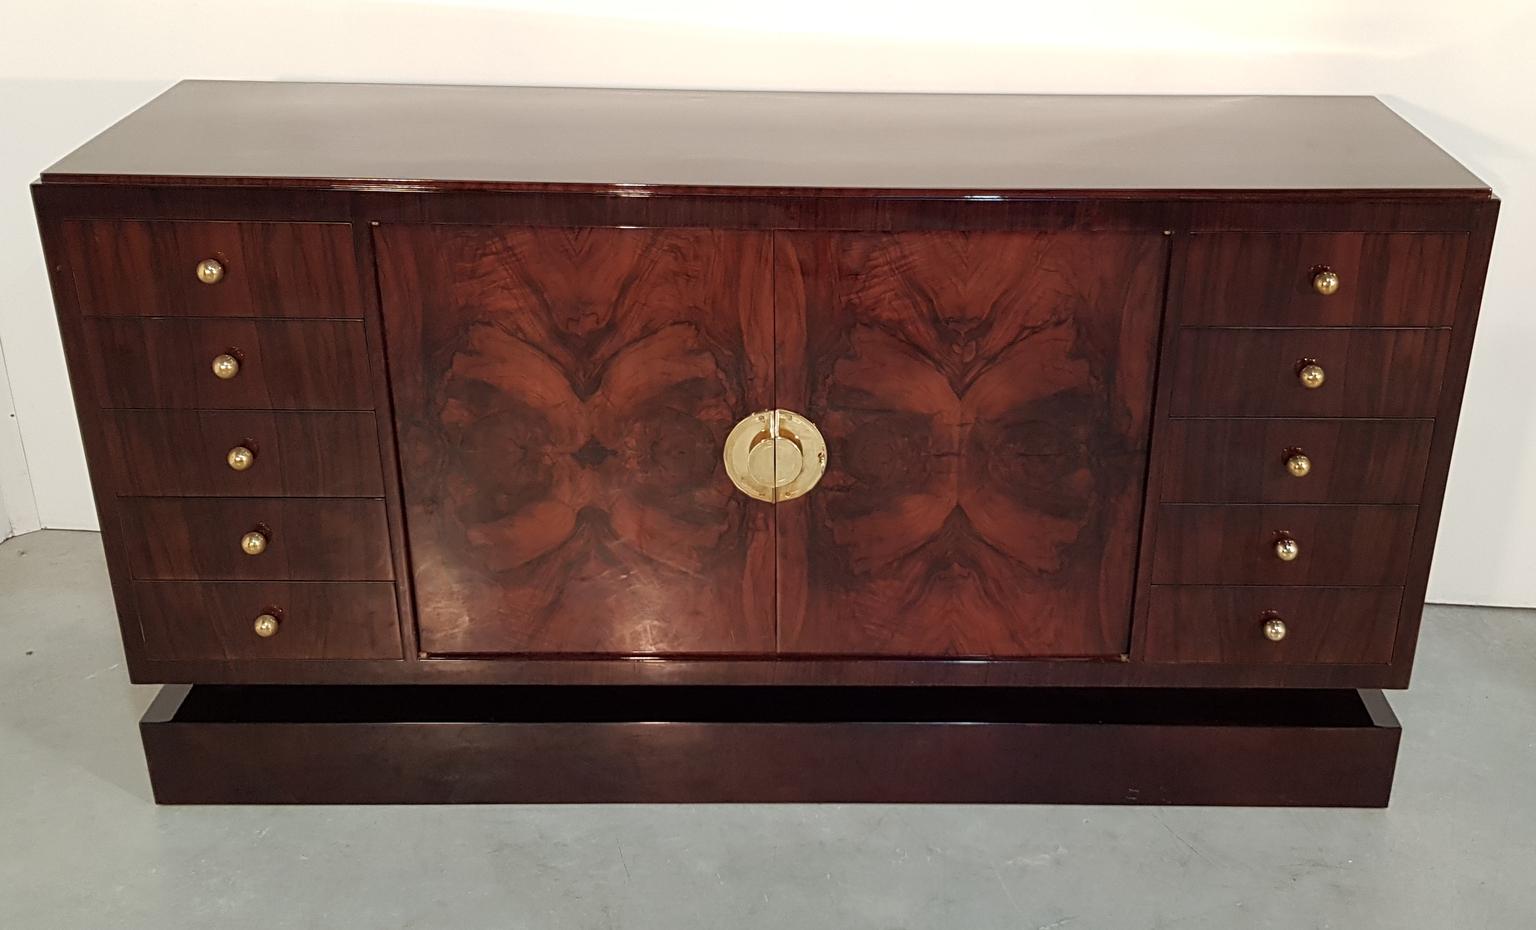 Unique Art Deco sideboard with very nice simple walnut and walnut burl veneer, brass ball shape handles on drawers and half moon brass handles on doors. France, 1930s. Recently restored.